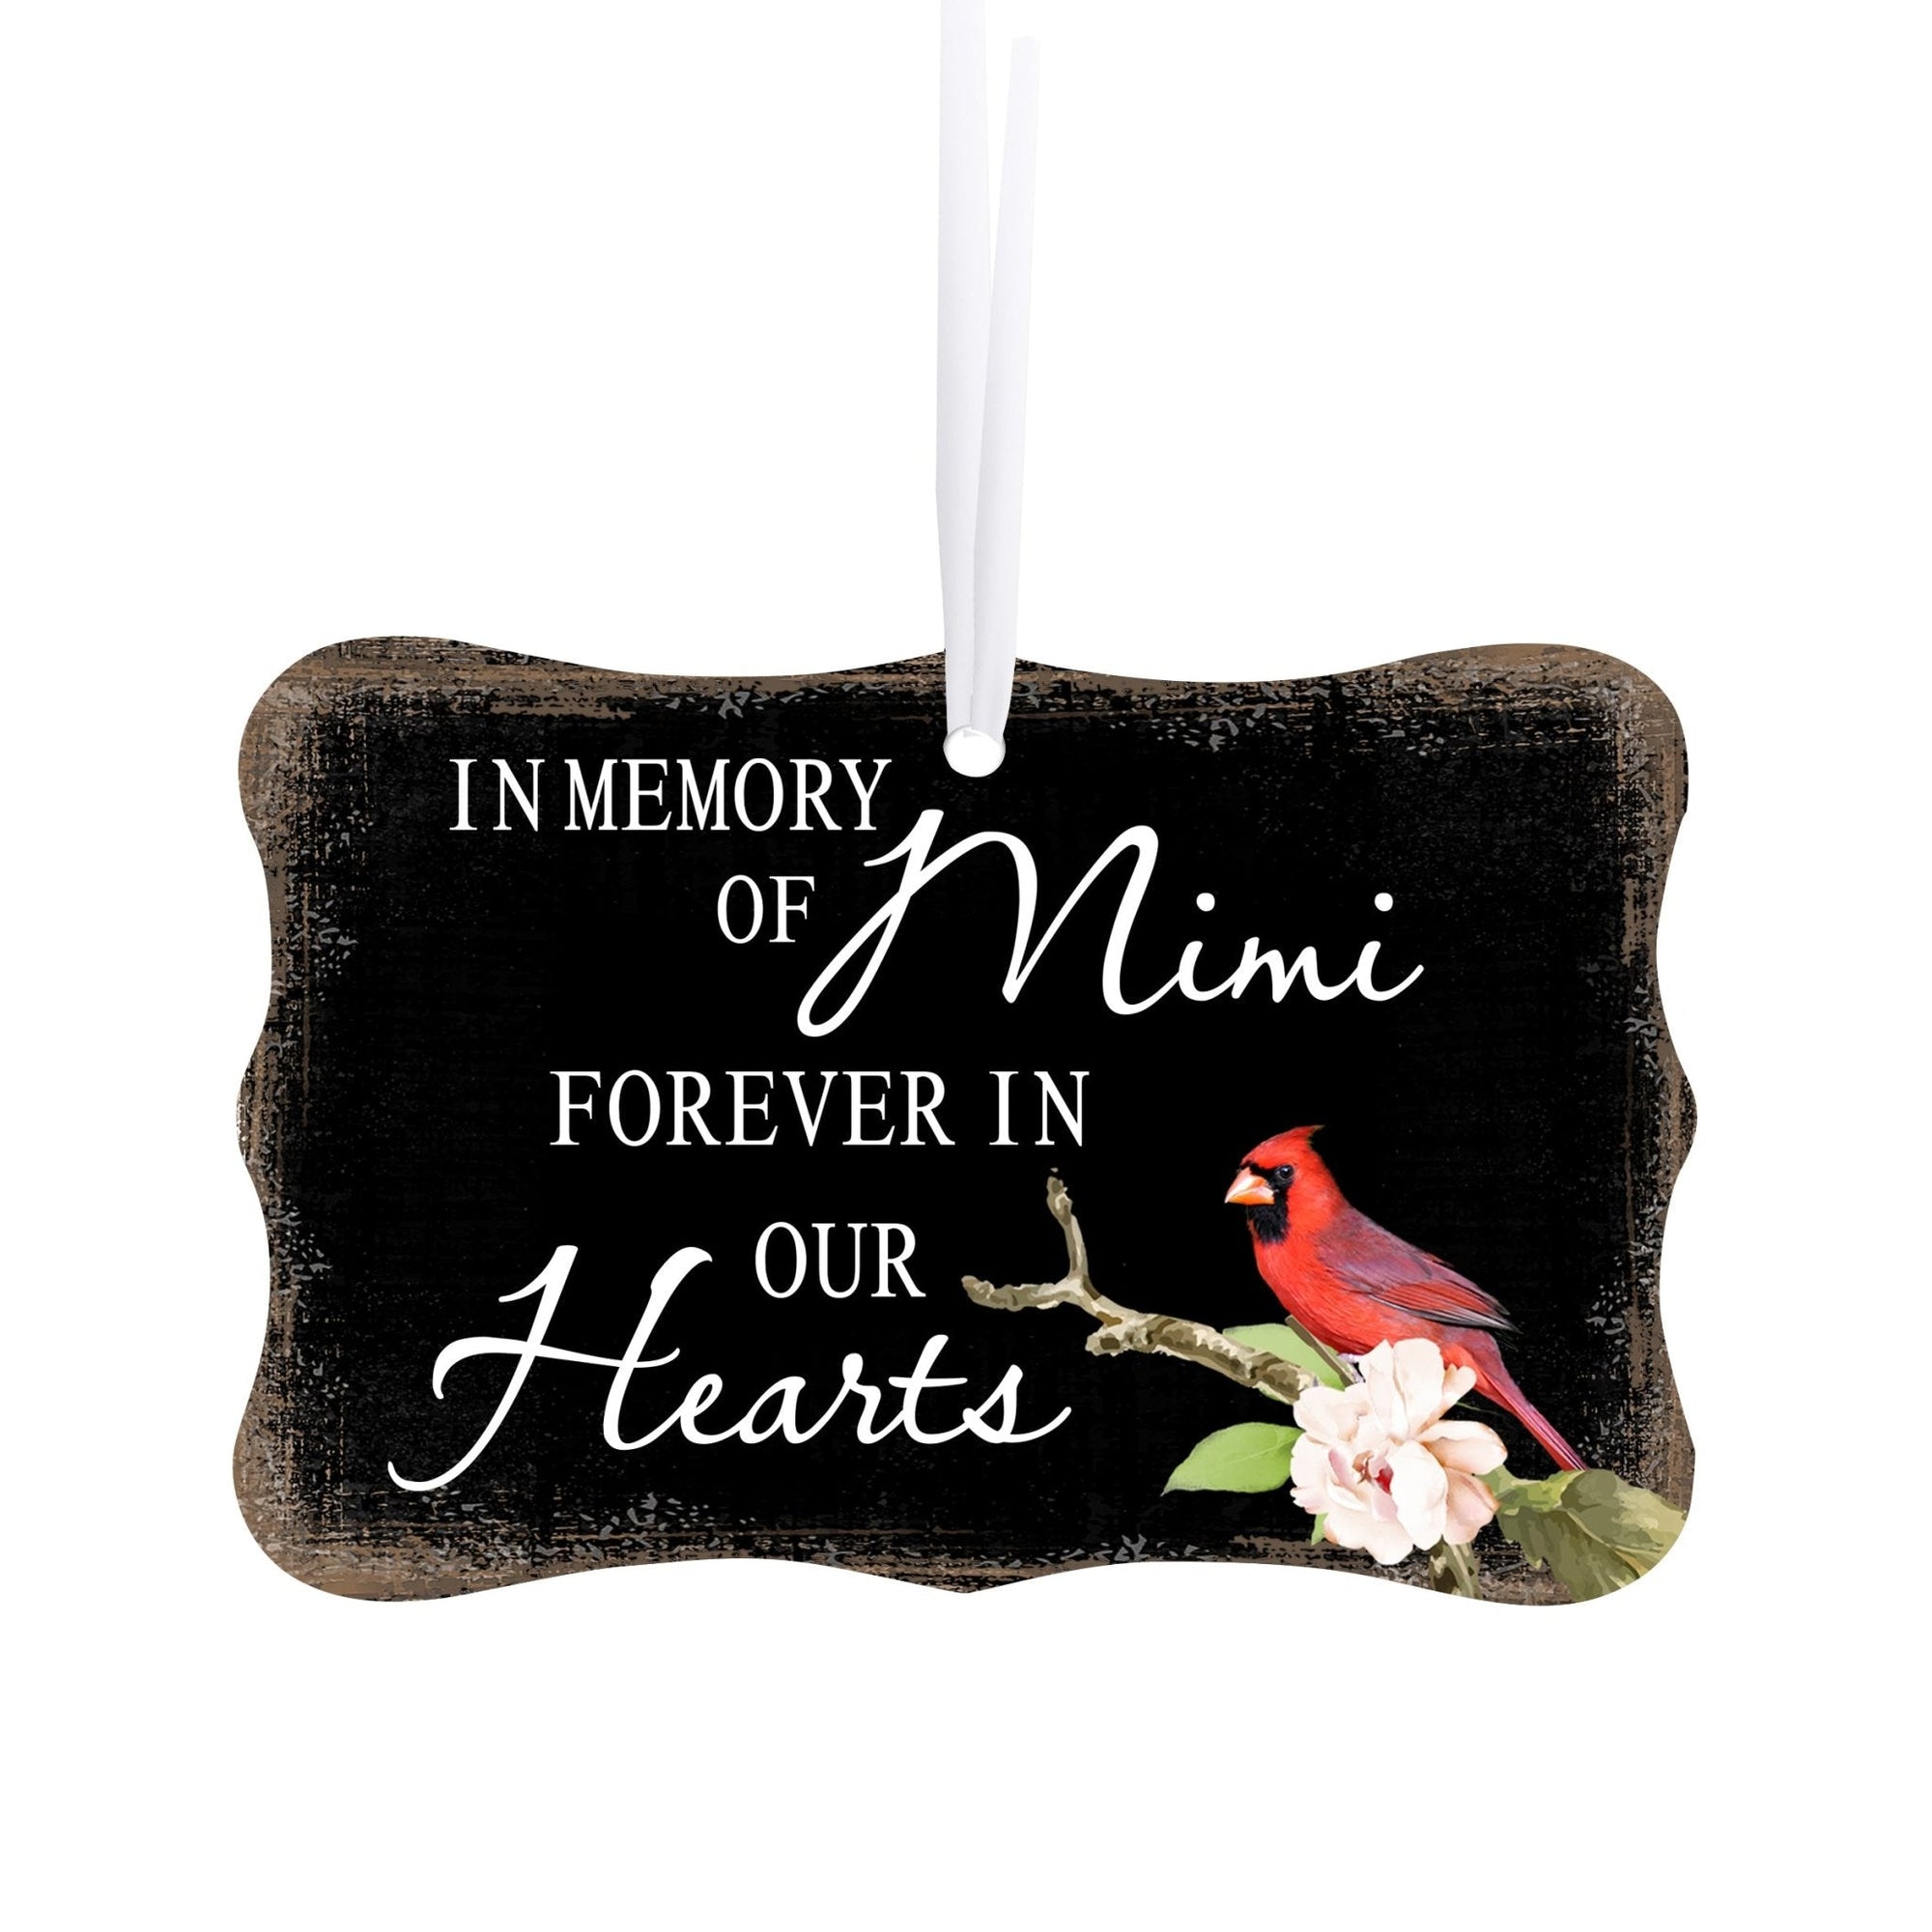 Memorial gifts for the loss of a loved one - A heartfelt and meaningful way to remember those we hold dear.